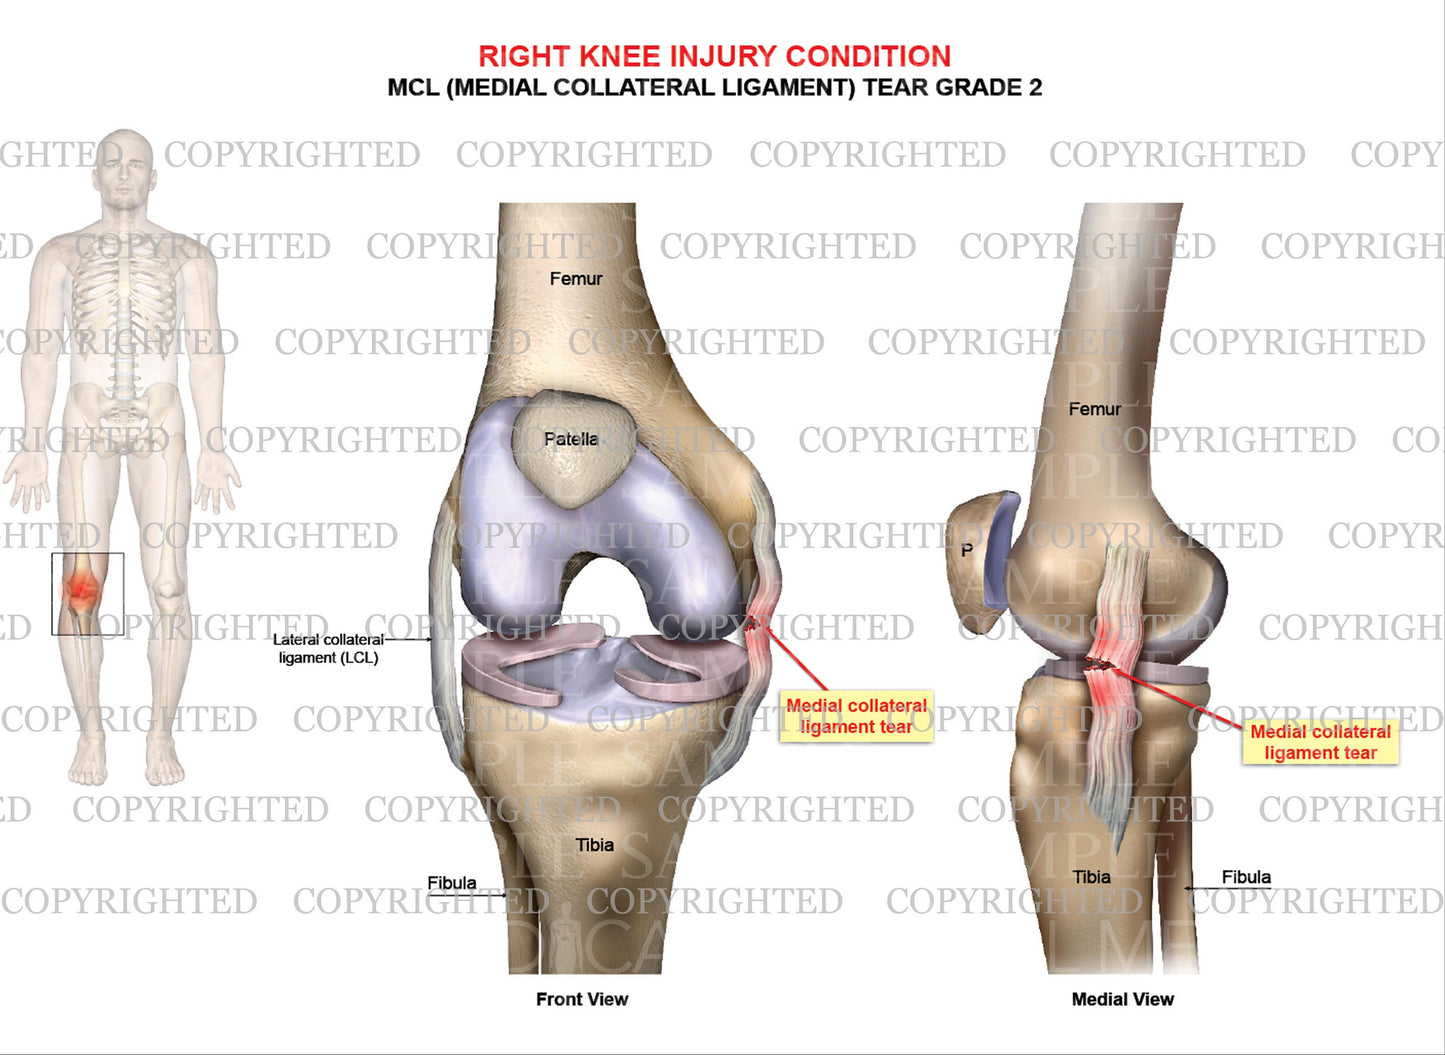 Right knee injury - MCL tear grade 2 - Male